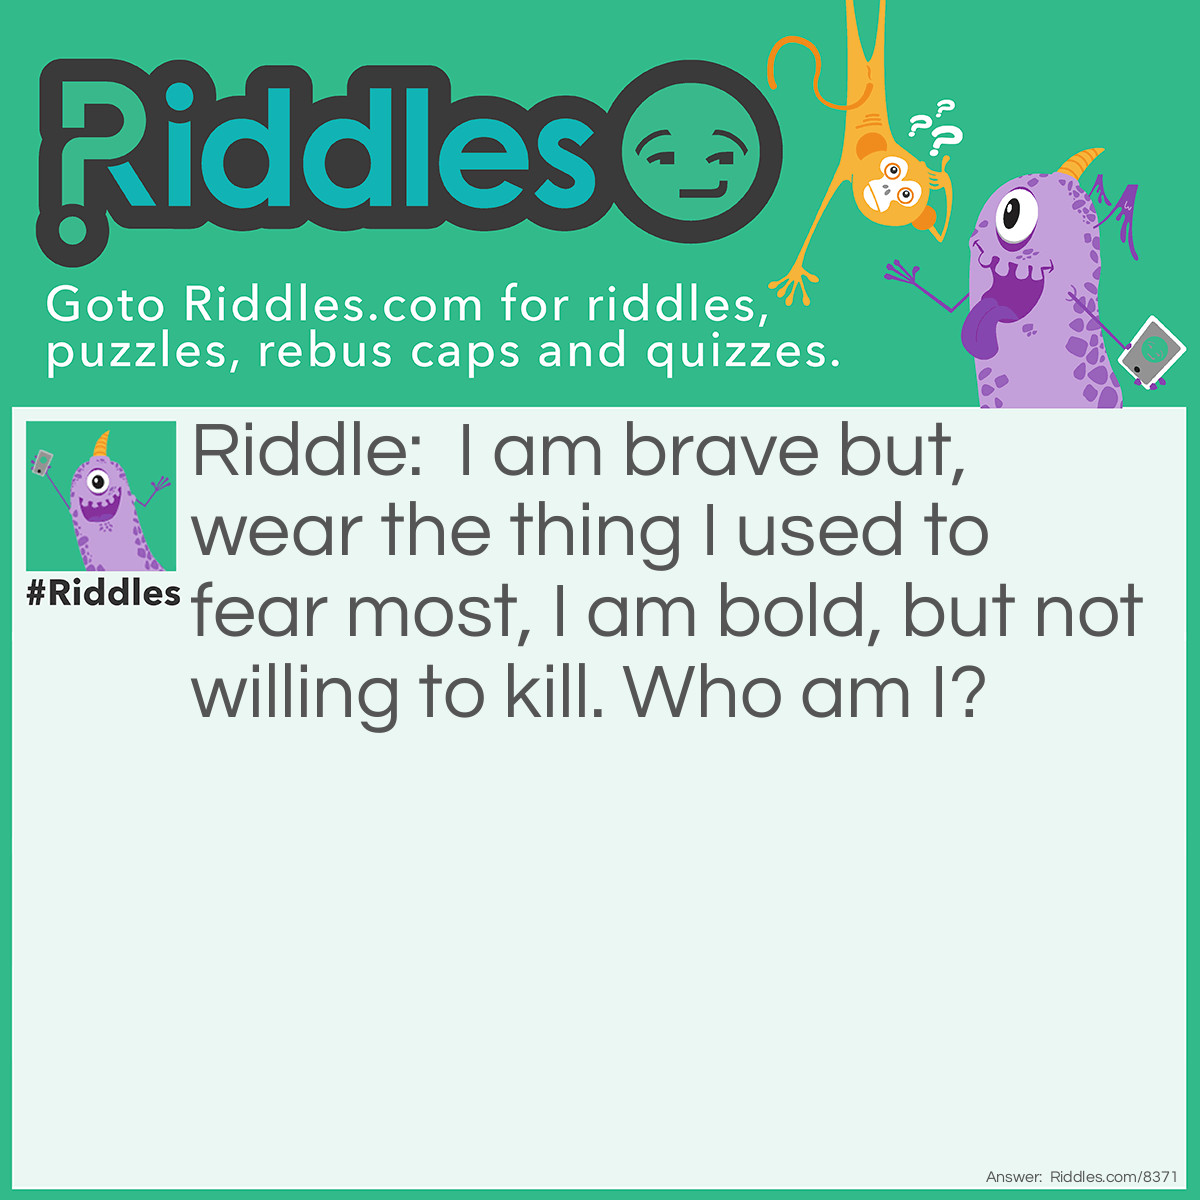 Riddle: I am brave but, wear the thing I used to fear most, I am bold, but not willing to kill. Who am I? Answer: Batman.